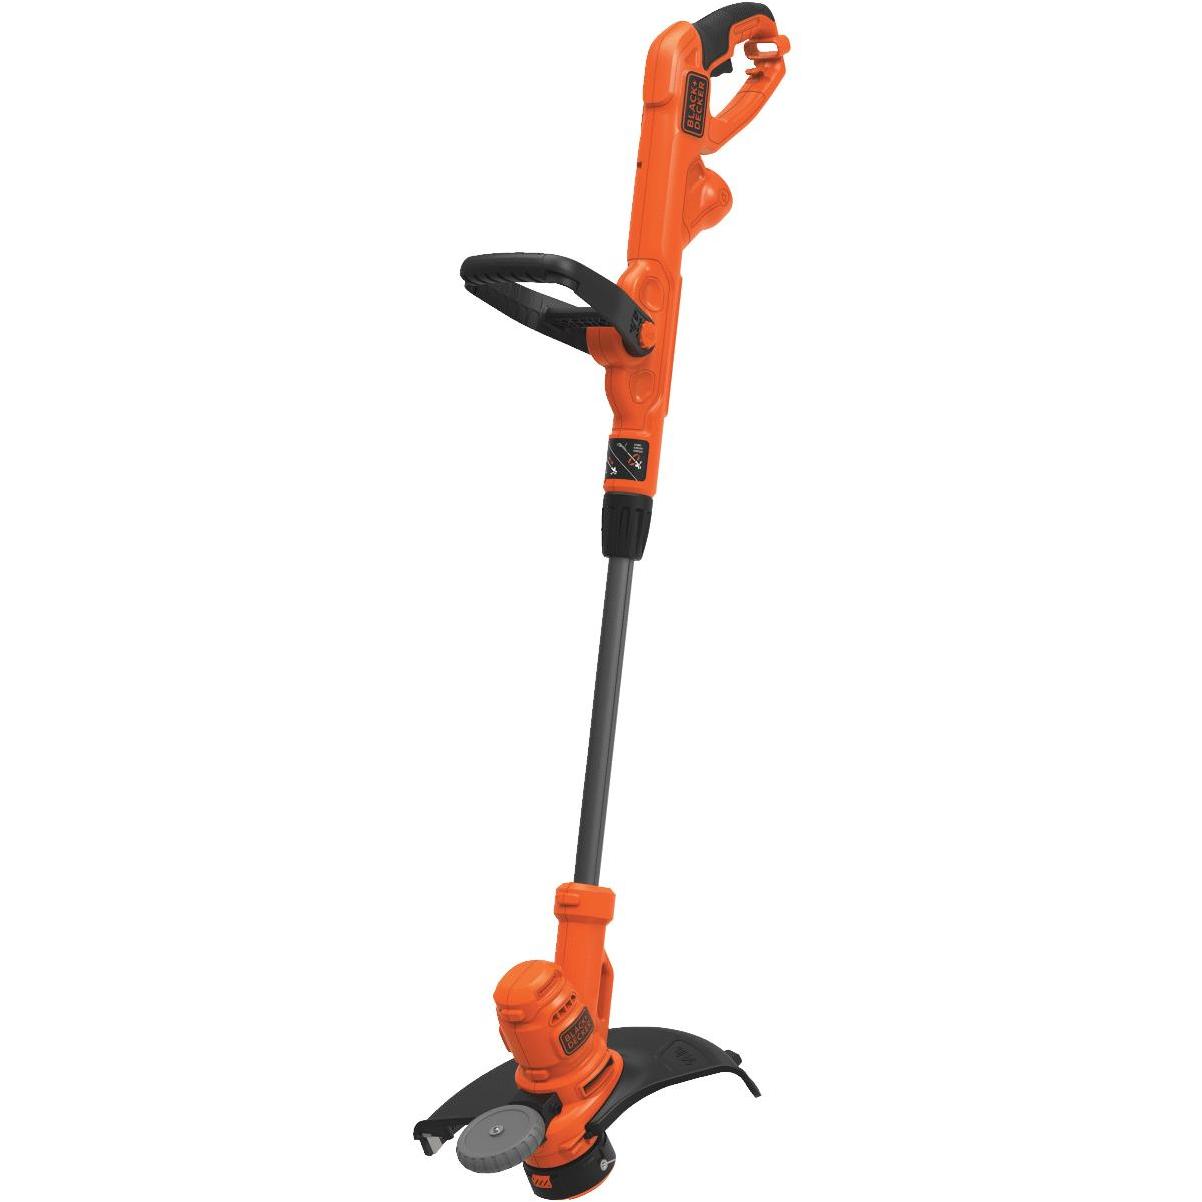 Buy Black & Decker 2-In-1 7-1/2 In. Corded Electric Lawn Edger & Trencher  12, 7-1/2 In.